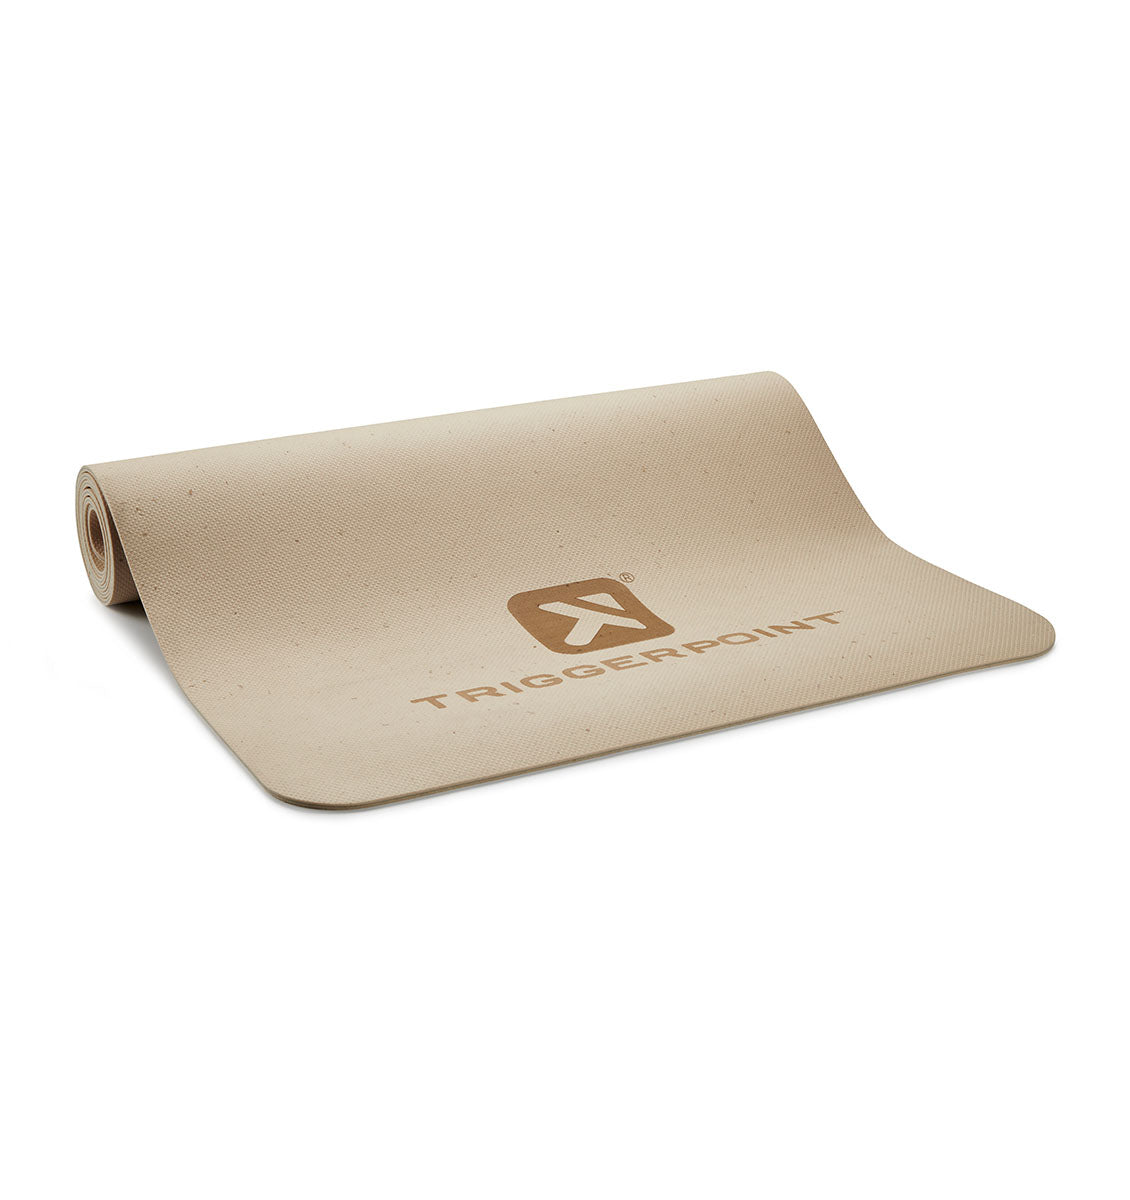 TriggerPoint Eco Fitness Mat - 6